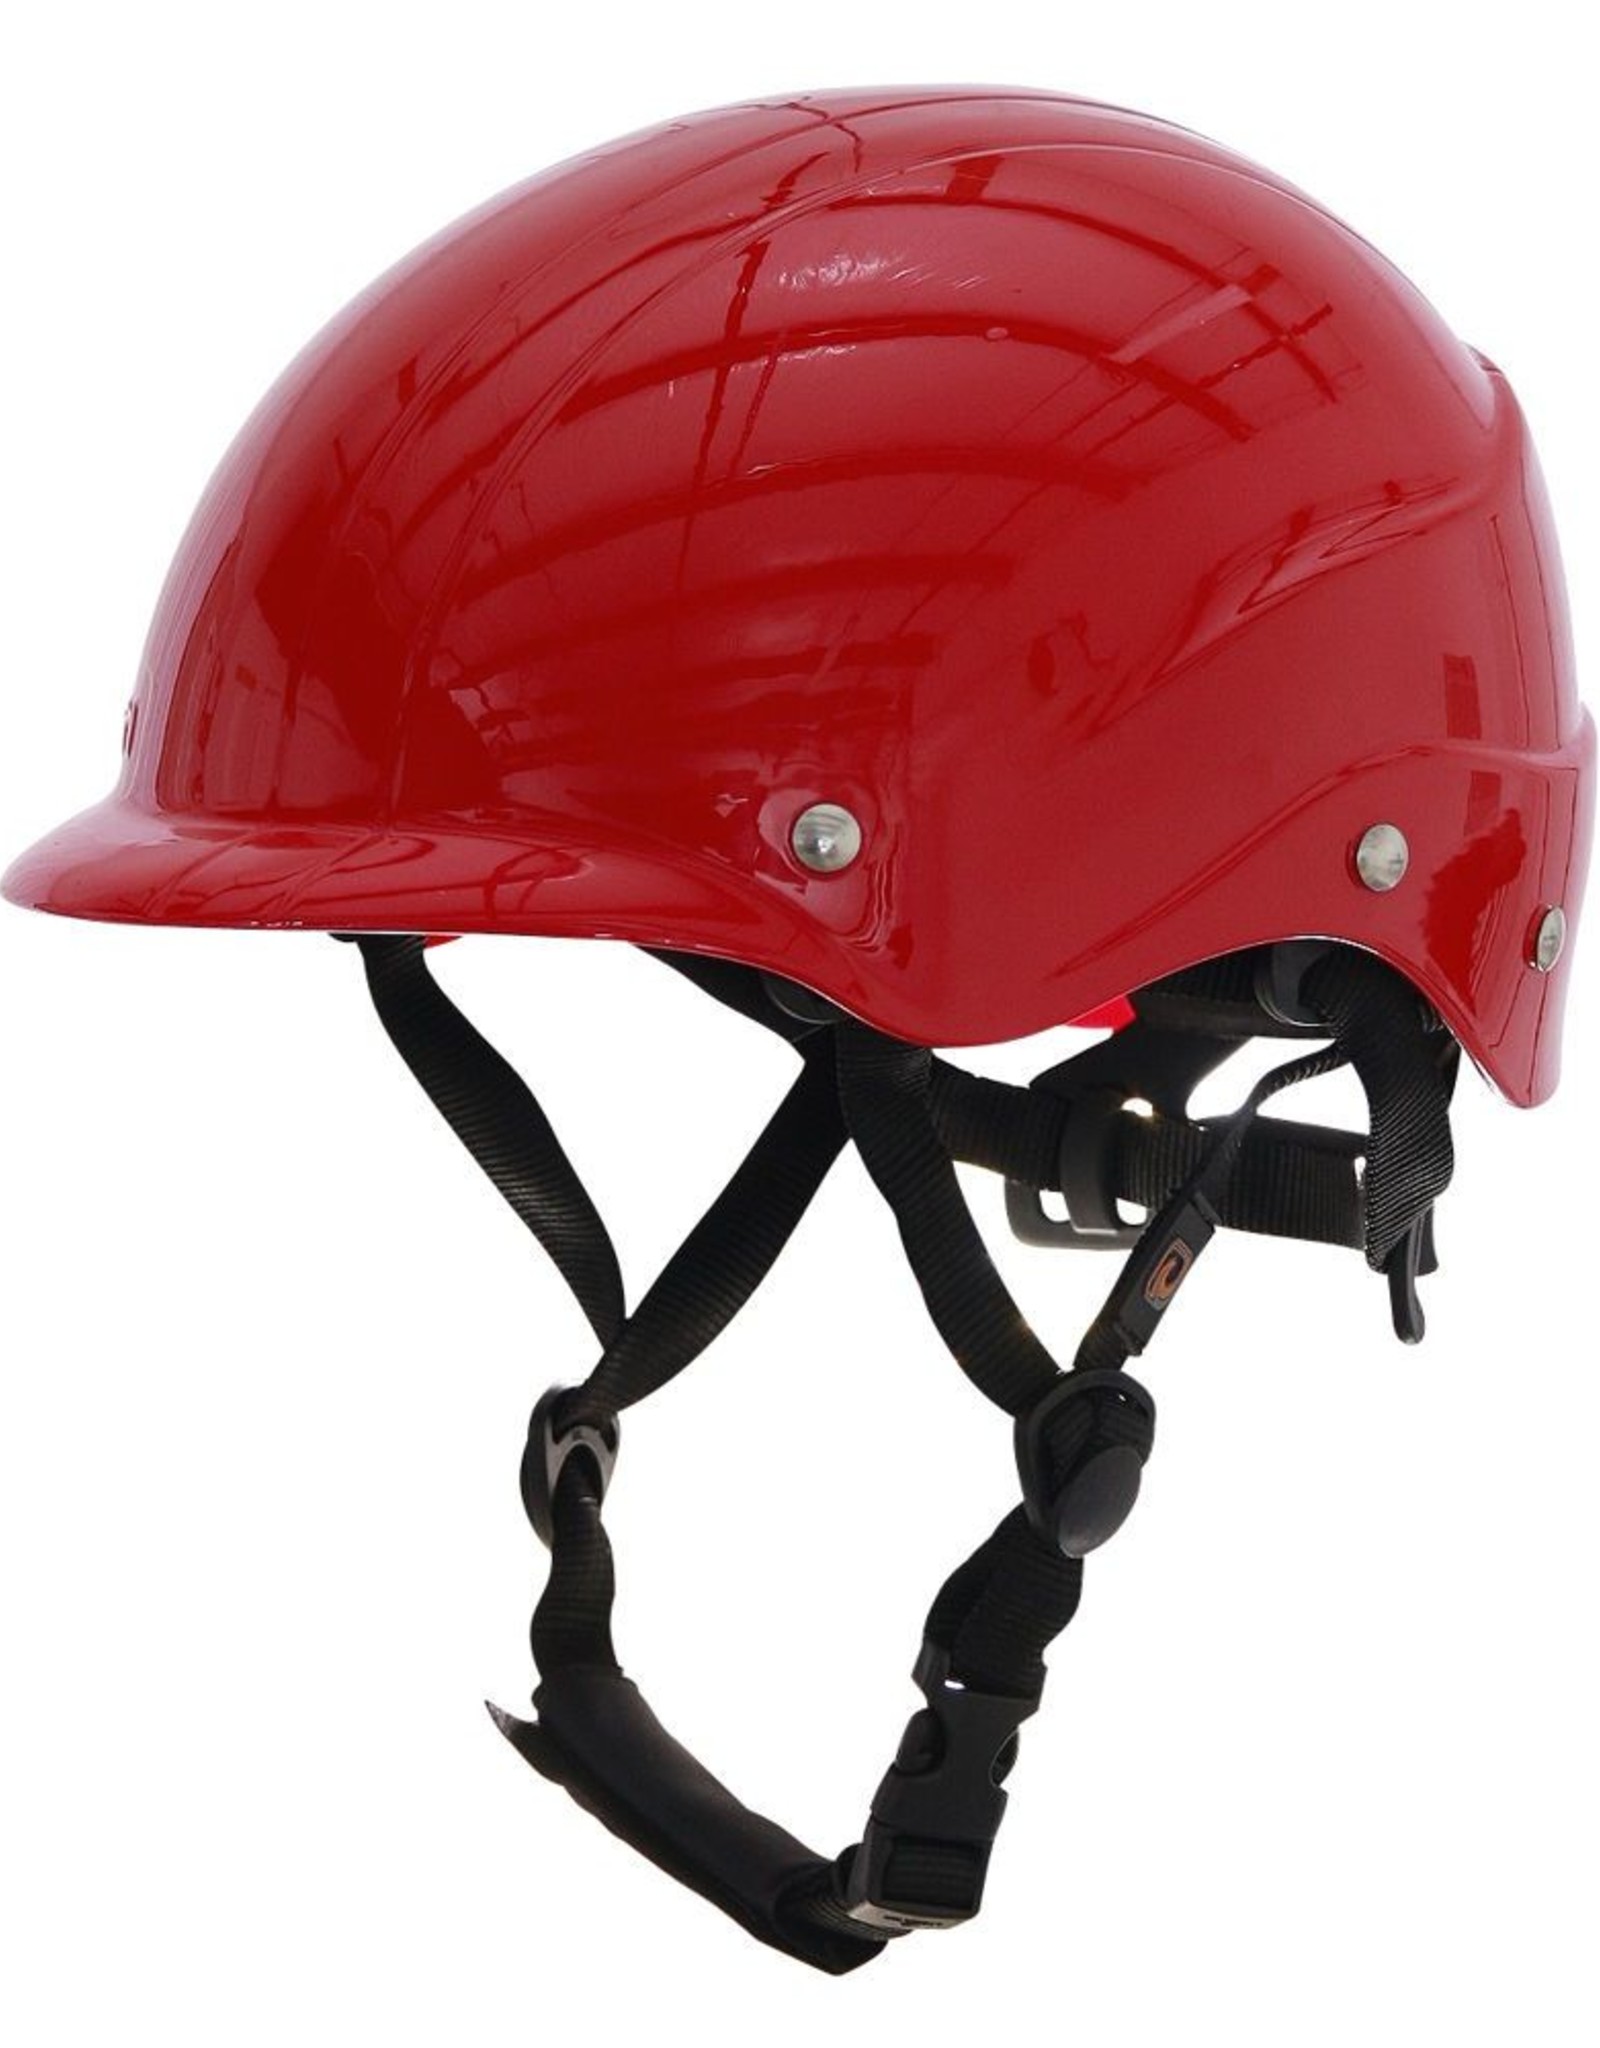 NRS WRSI Current Helmet Without Vents